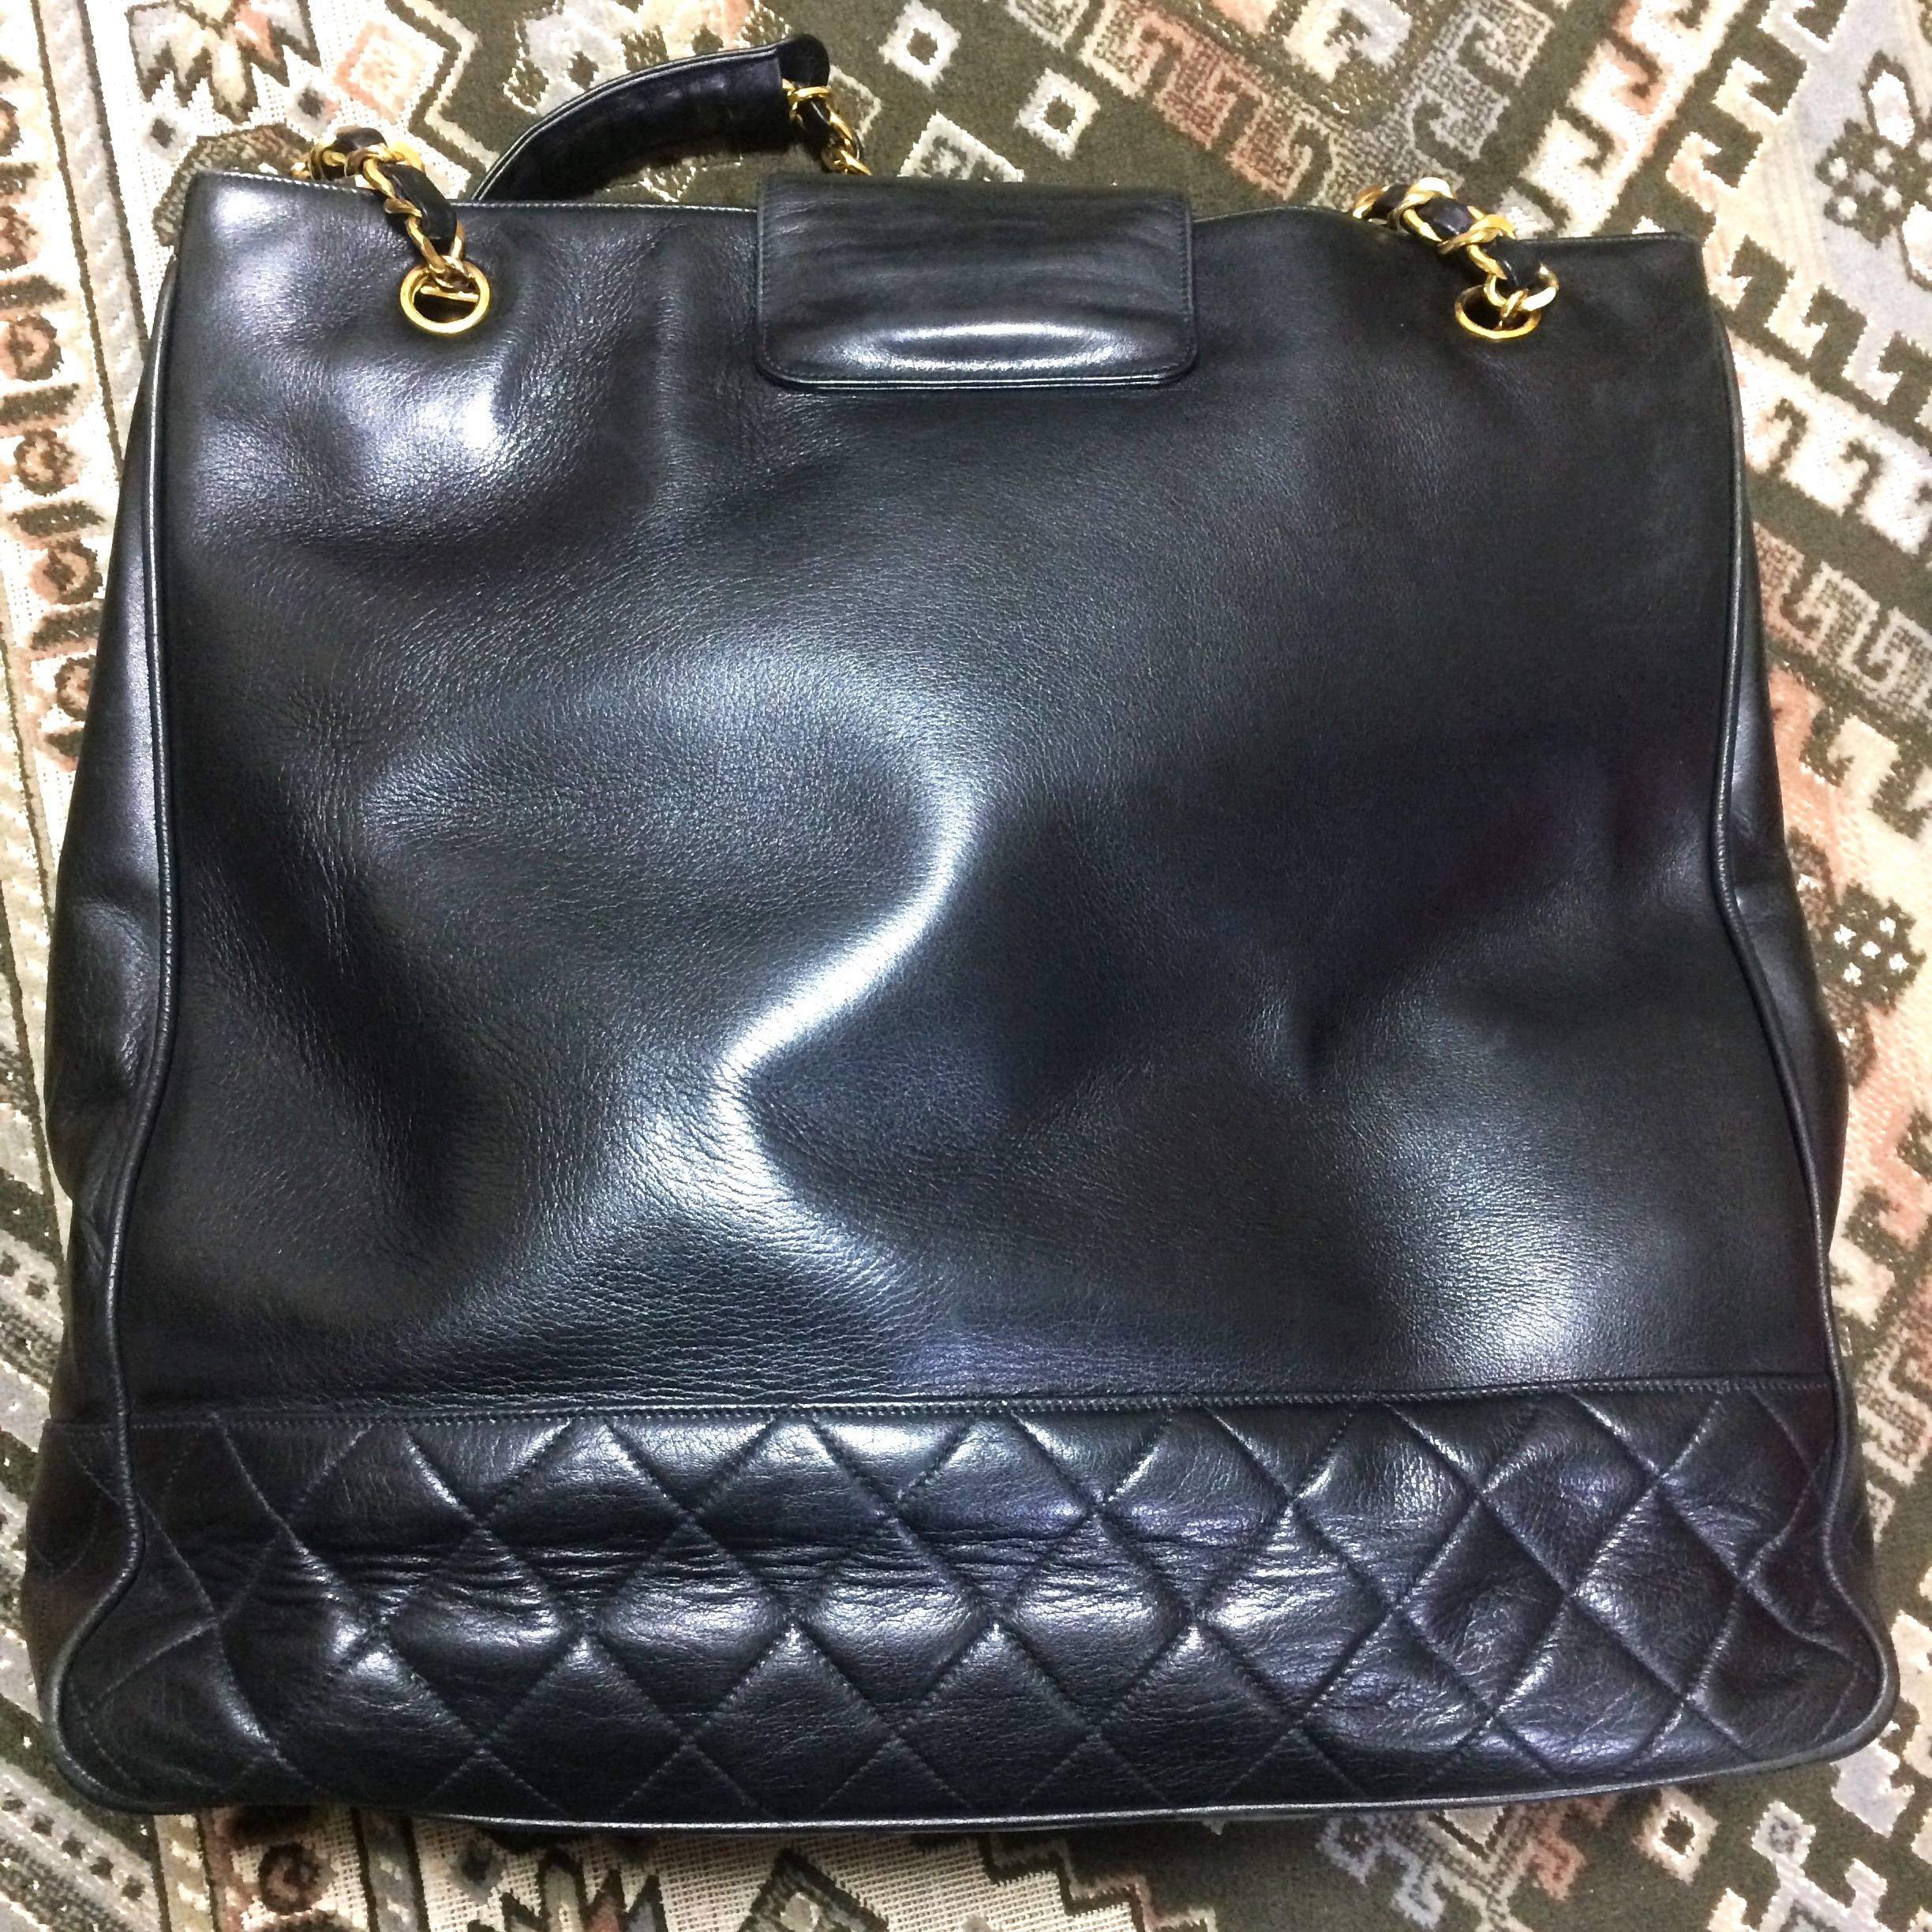 Women's Vintage CHANEL black calf leather large chain shoulder tote bag with golden CC.